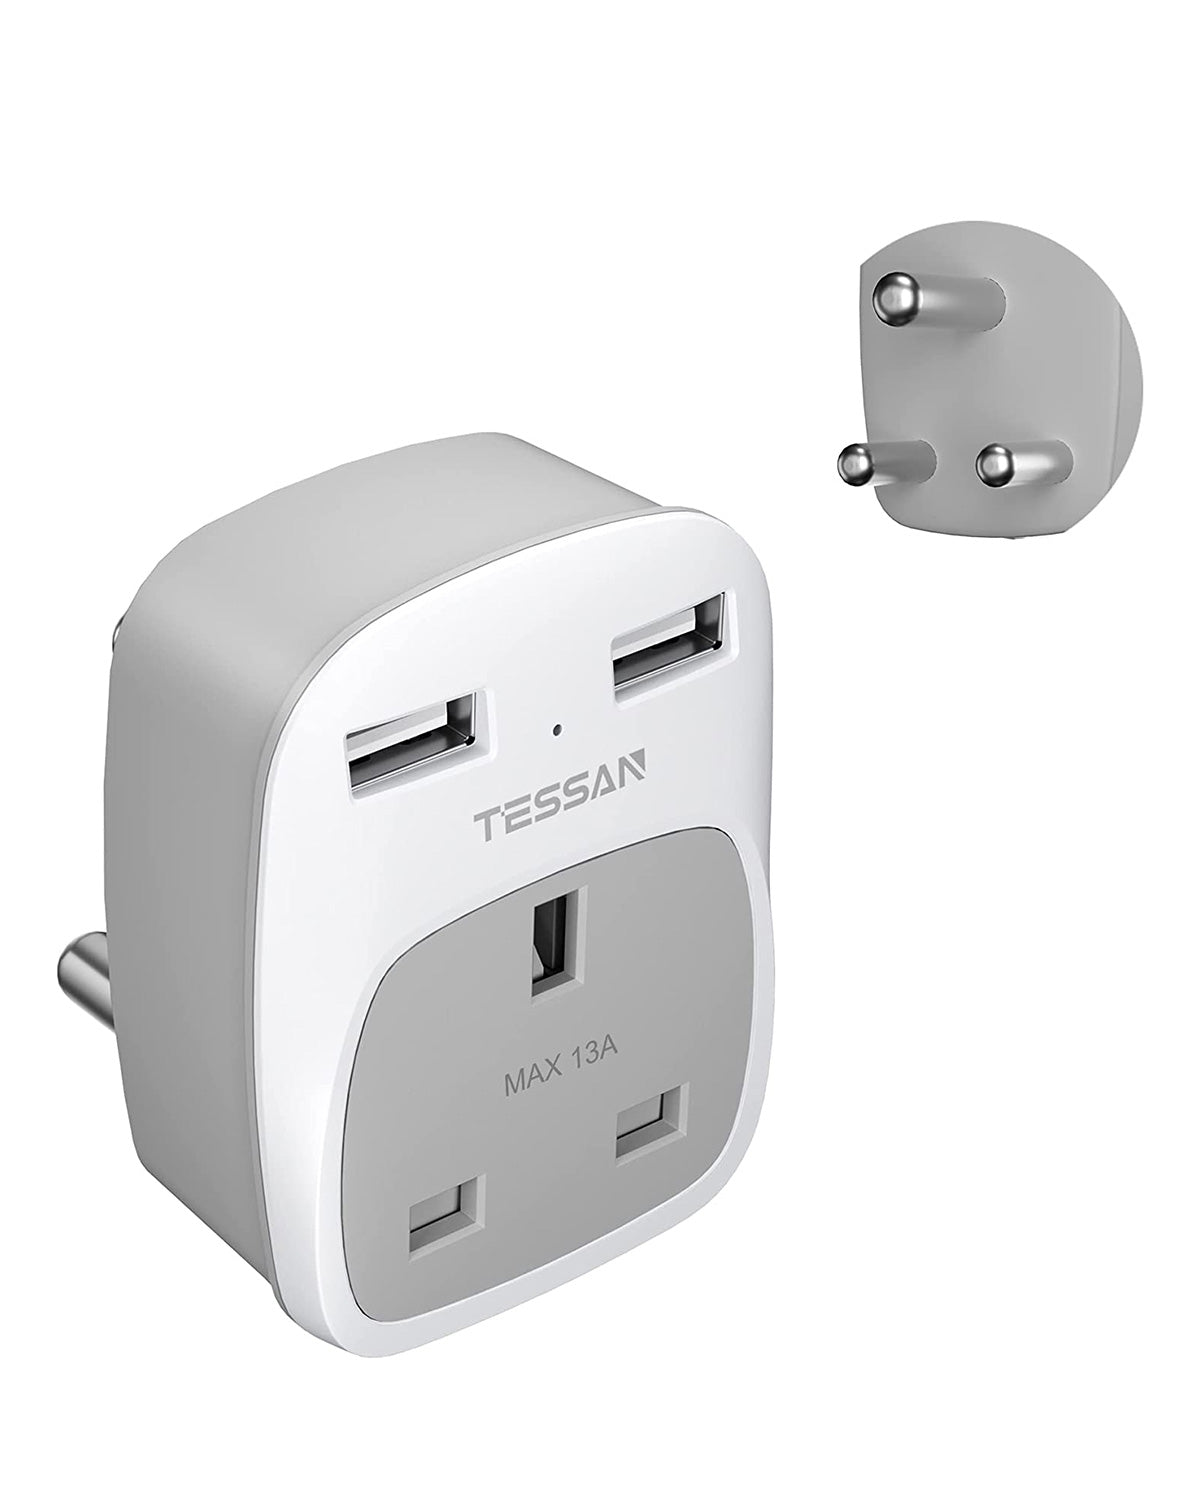 UK to India Travel Adapter 1 outlets and 2 USB ports